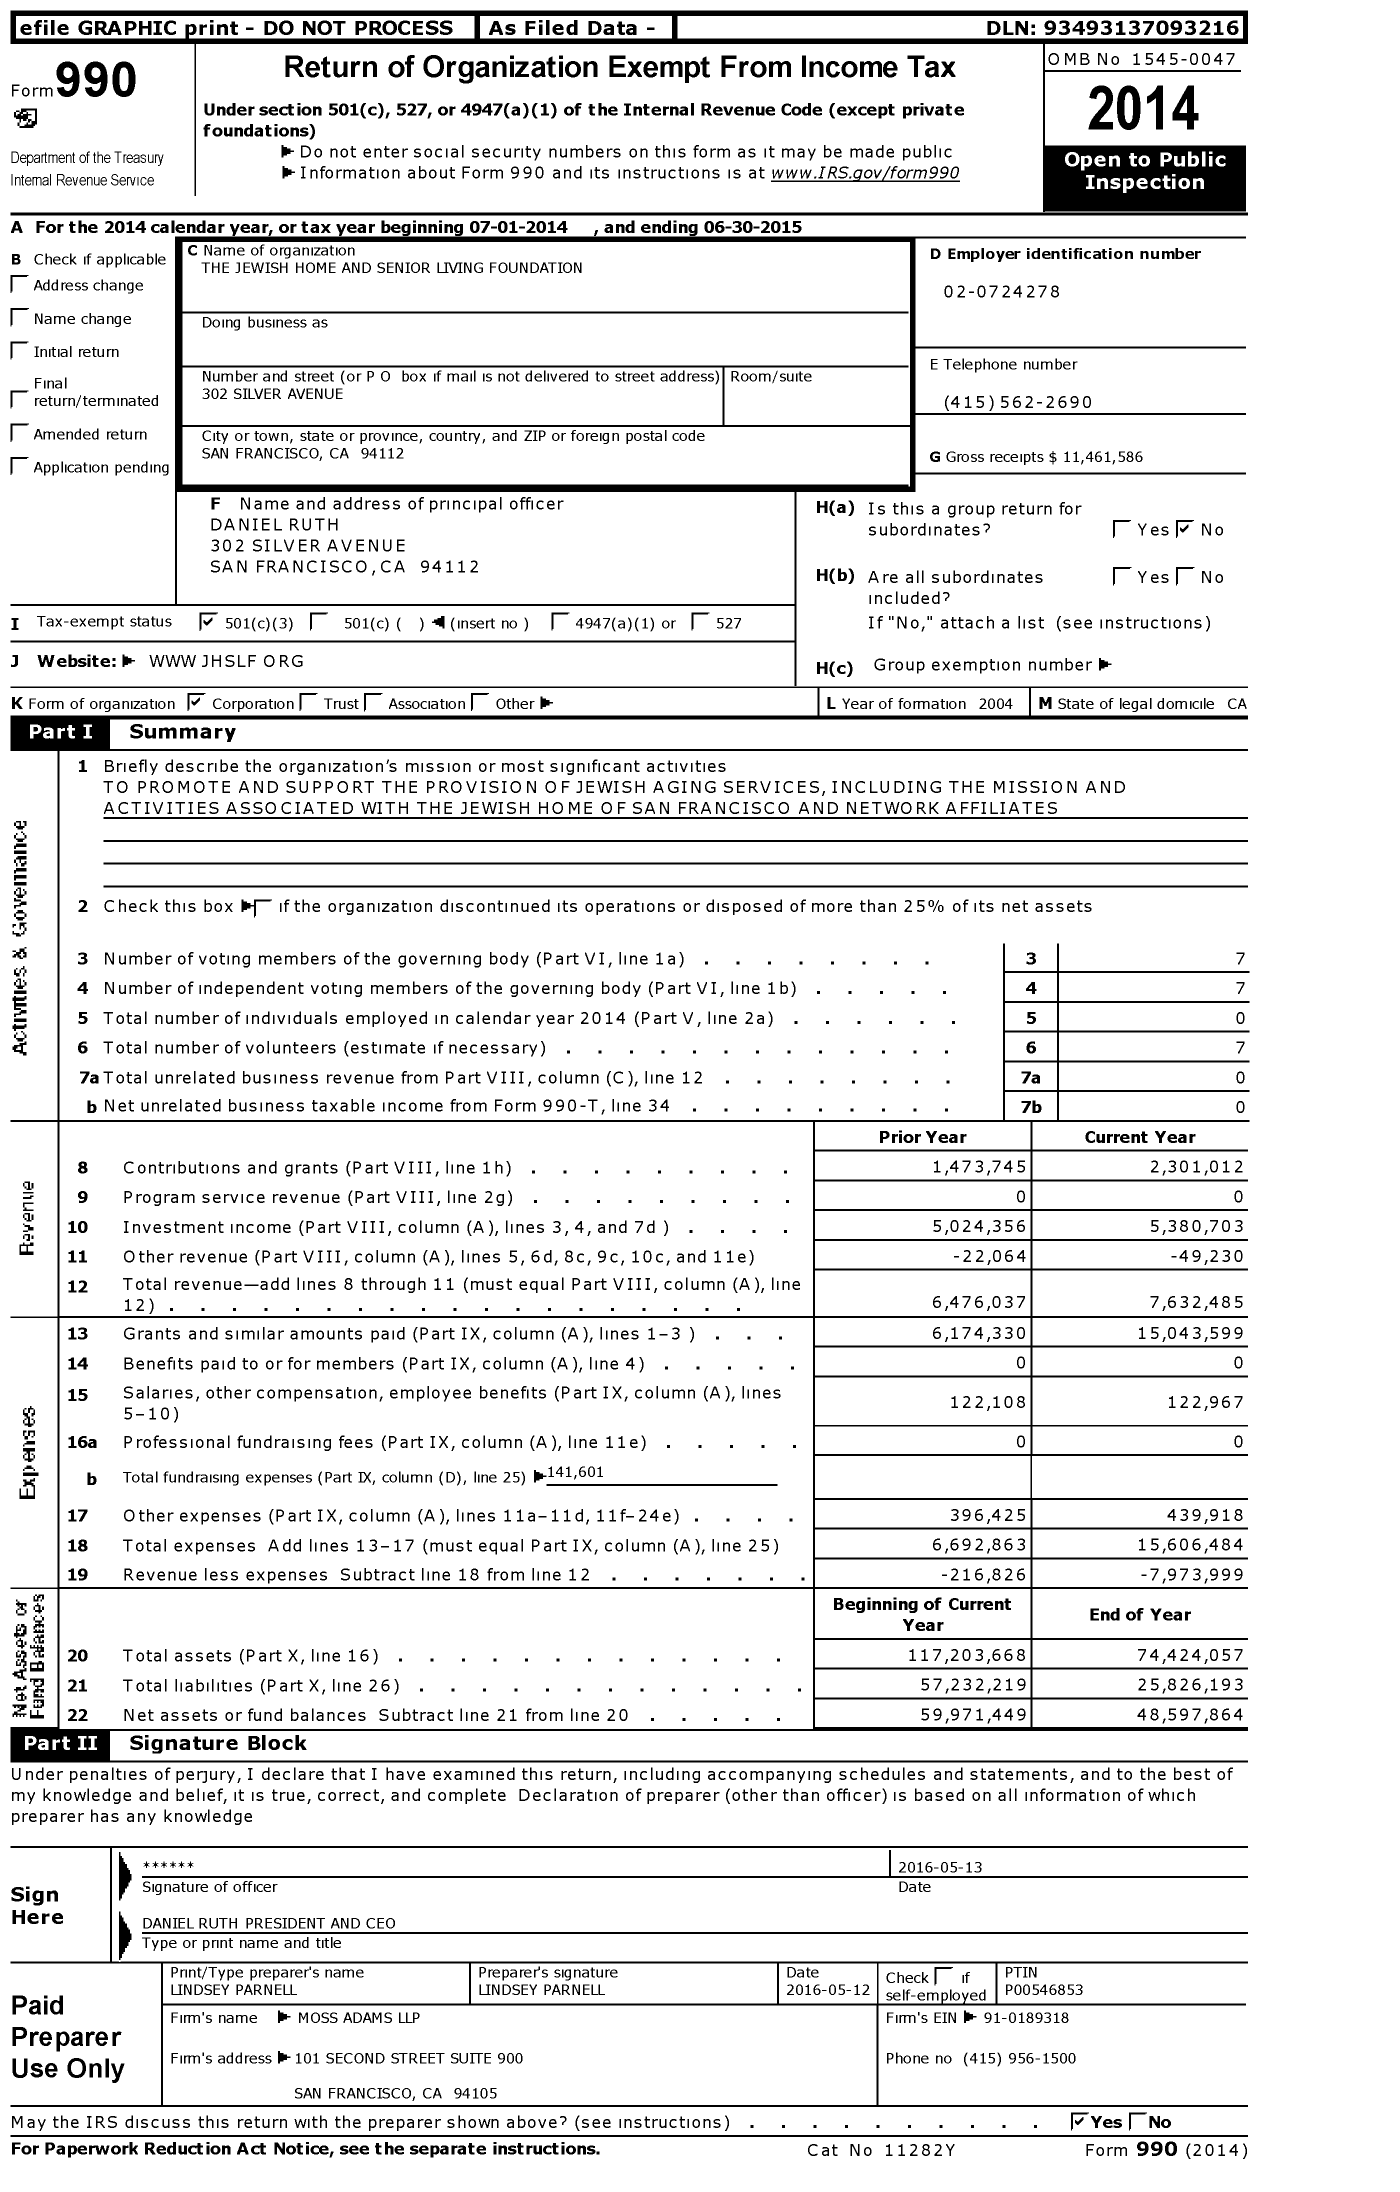 Image of first page of 2014 Form 990 for The Jewish Home and Senior Living Foundation (JHSLF)